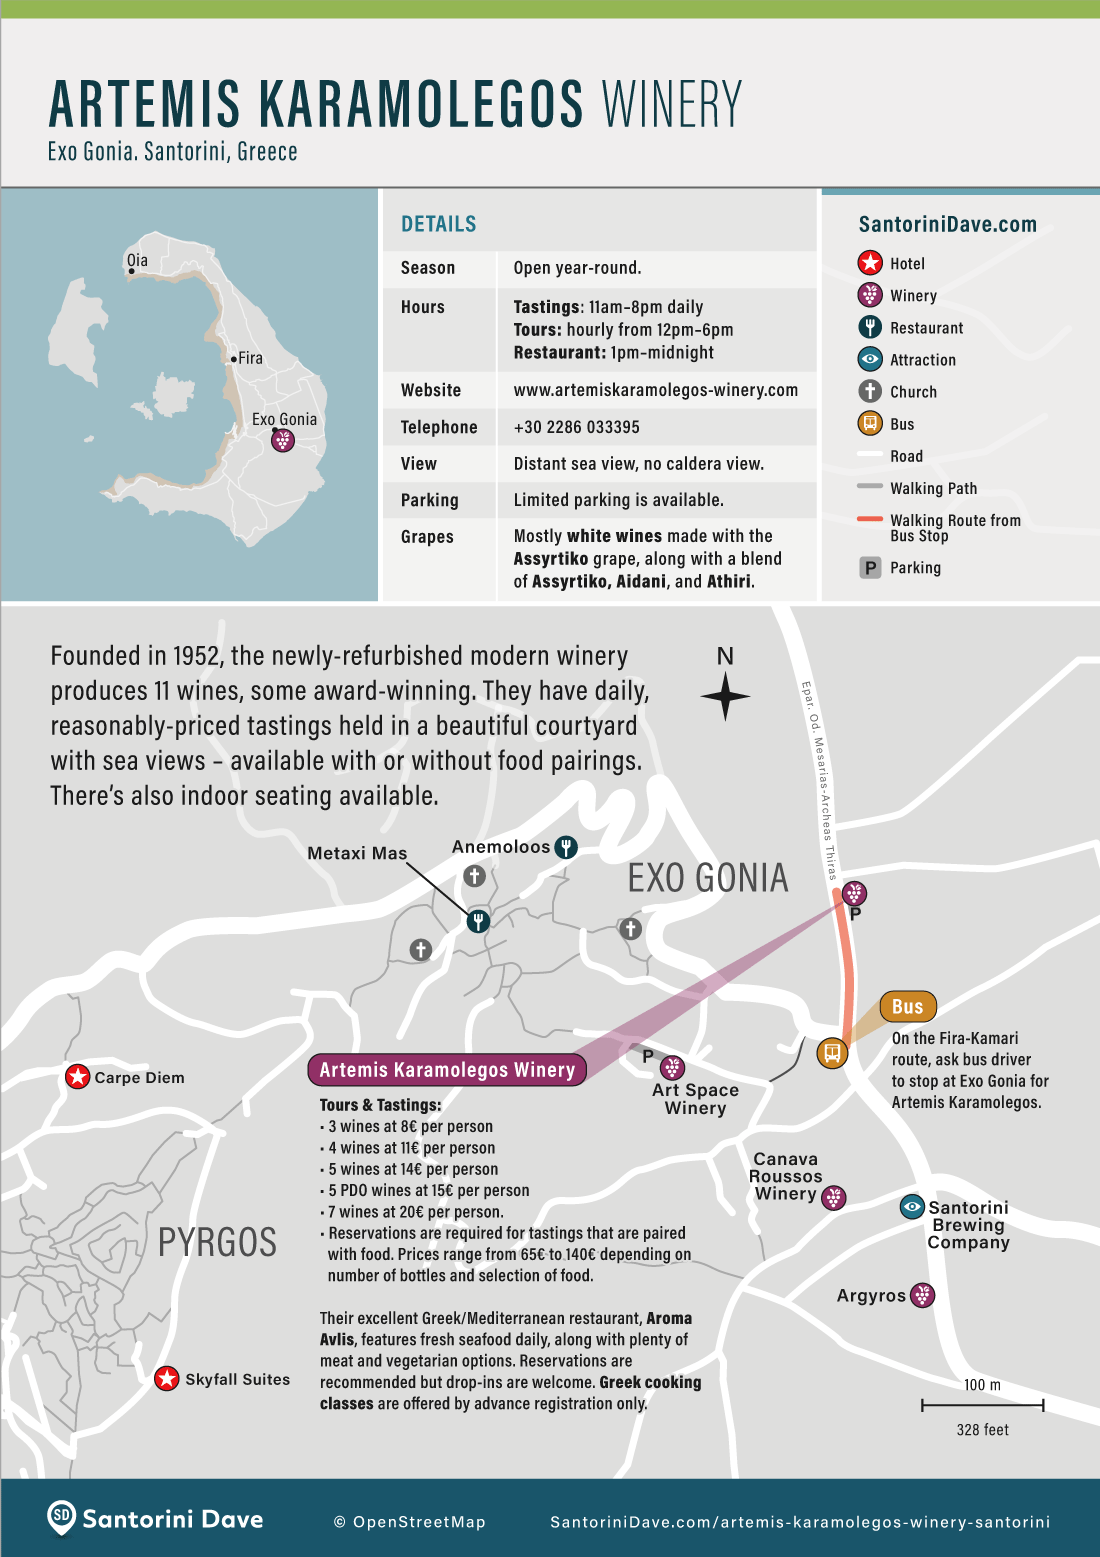 Map showing the location, and nearby restaurants and bus stops for Artemis Karamolegos Winery in Santorini